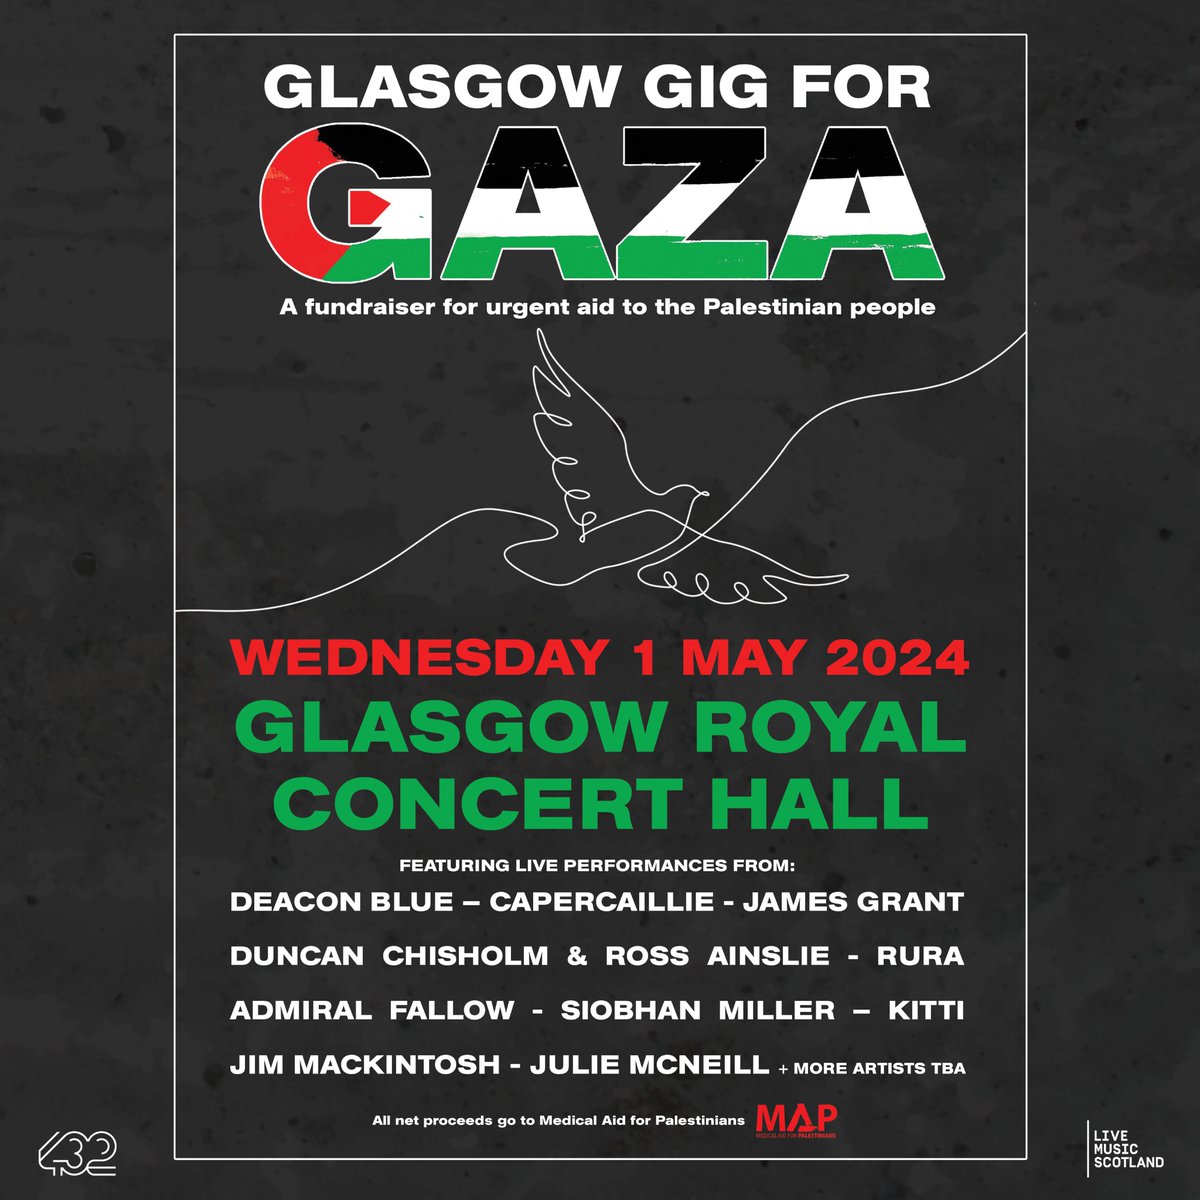 TONIGHT - Glasgow Gig For Gaza - a fundraiser for urgent aid to the Palestinian people at Glasgow Royal Concert Hall ✨ Featuring performances from Deacon Blue, Capercaillie, and more. Final tickets HERE ➡️ bit.ly/4aJq0r8